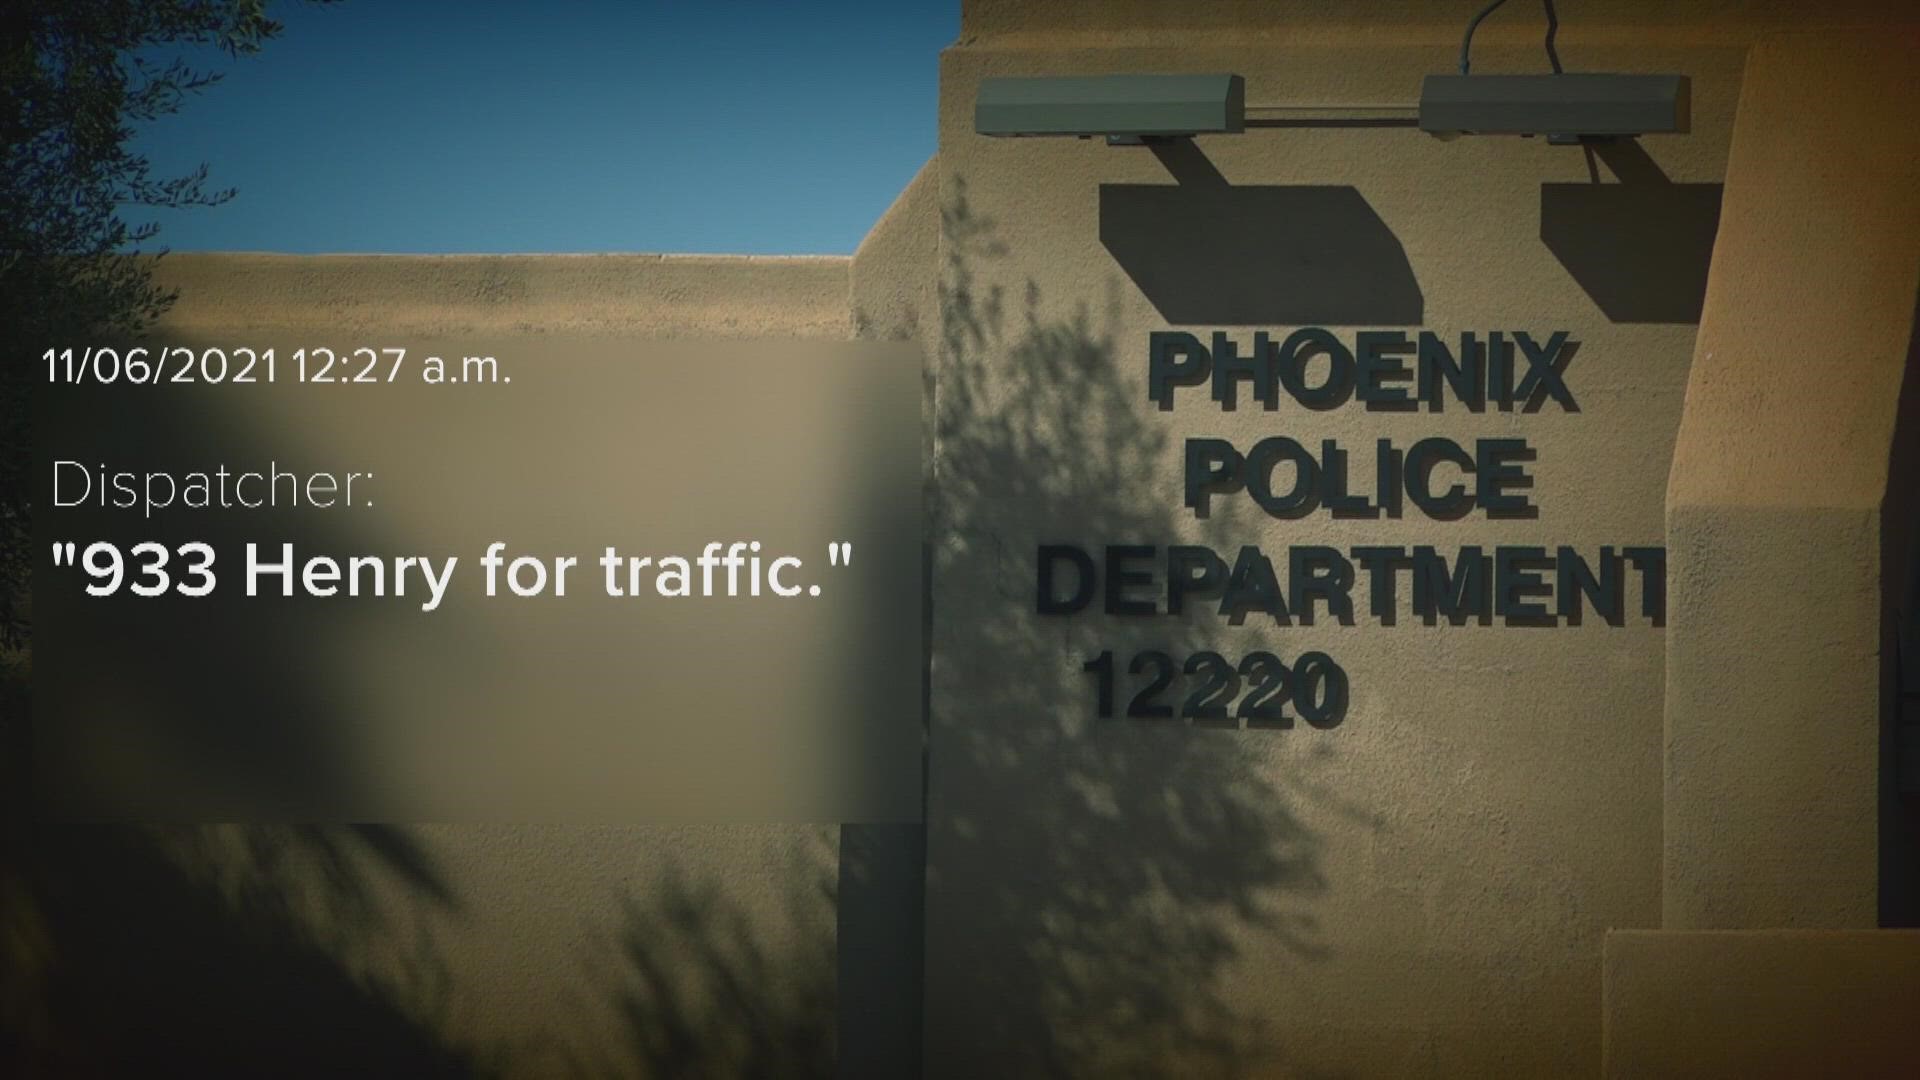 A Phoenix police officer resigned his position over radio traffic after dispatchers told him the entire shift needed to stay on the clock to answer more calls.